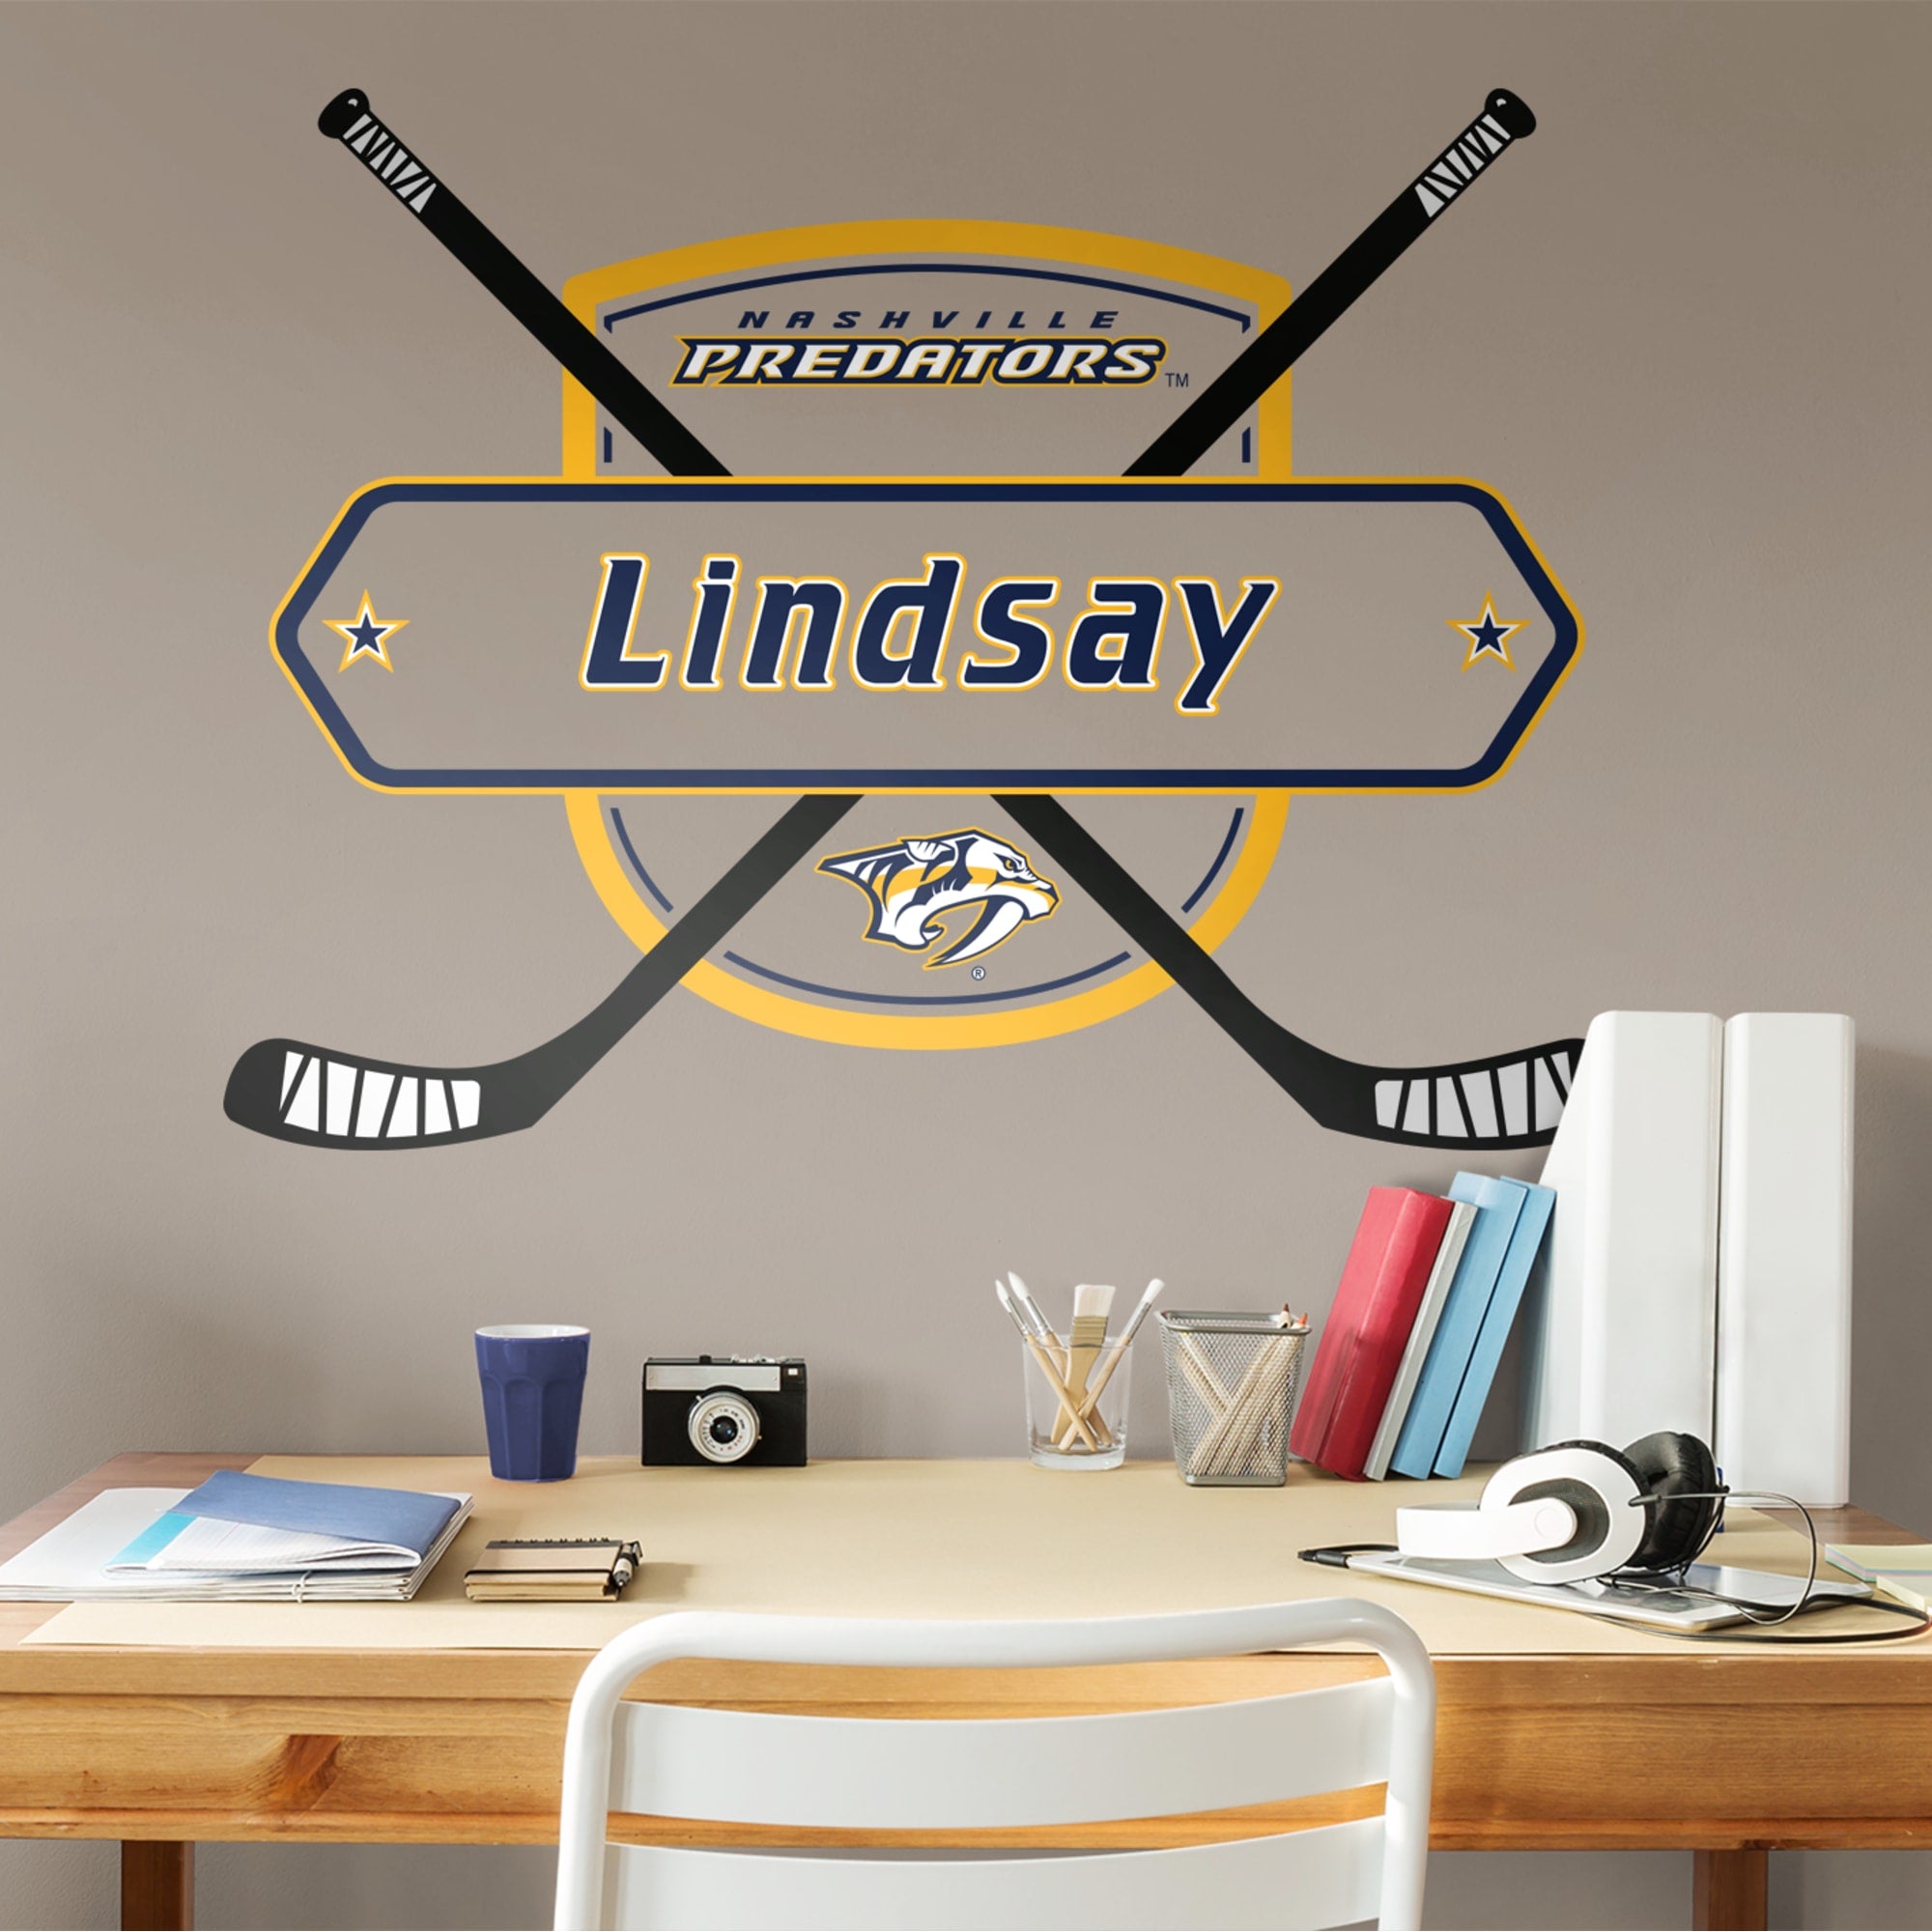 Nashville Predators: Personalized Name - Officially Licensed NHL Transfer Decal 51.0"W x 38.0"H by Fathead | Vinyl